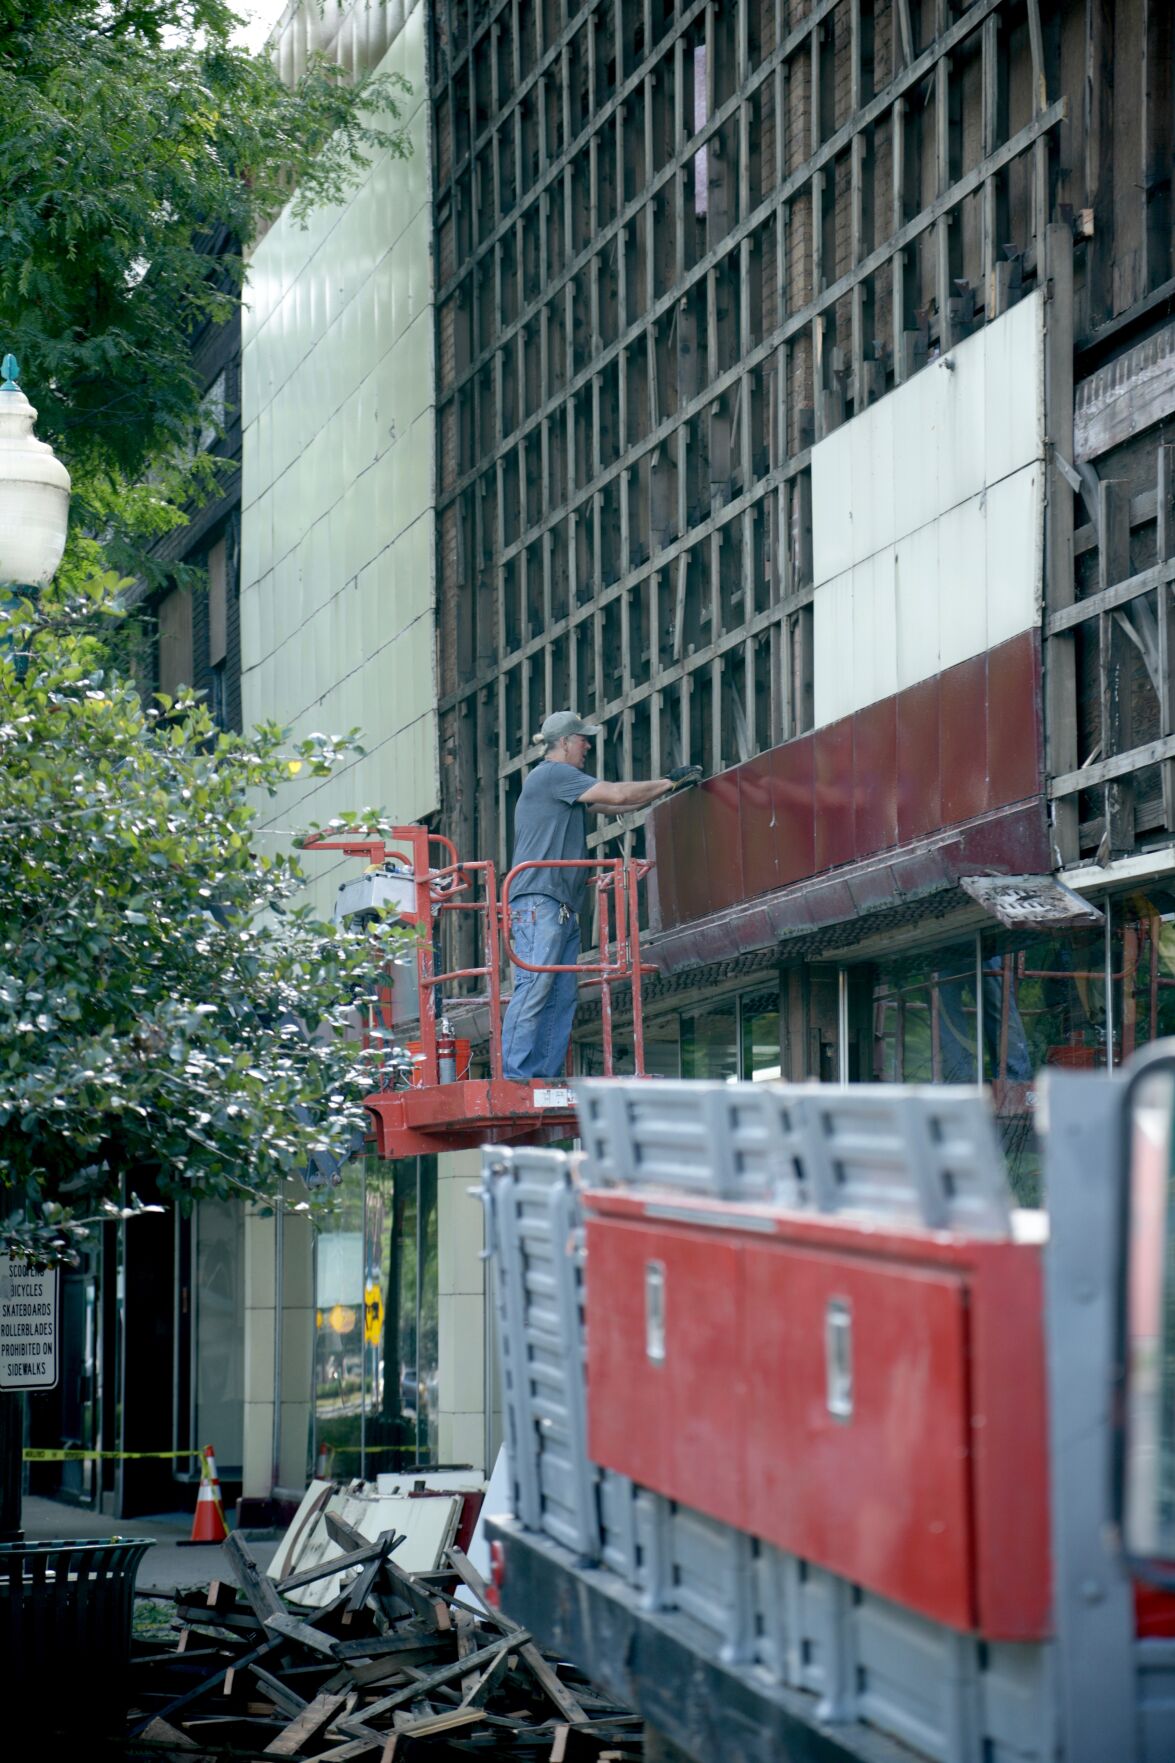 Bill Twyford removes tiles from Volckman building